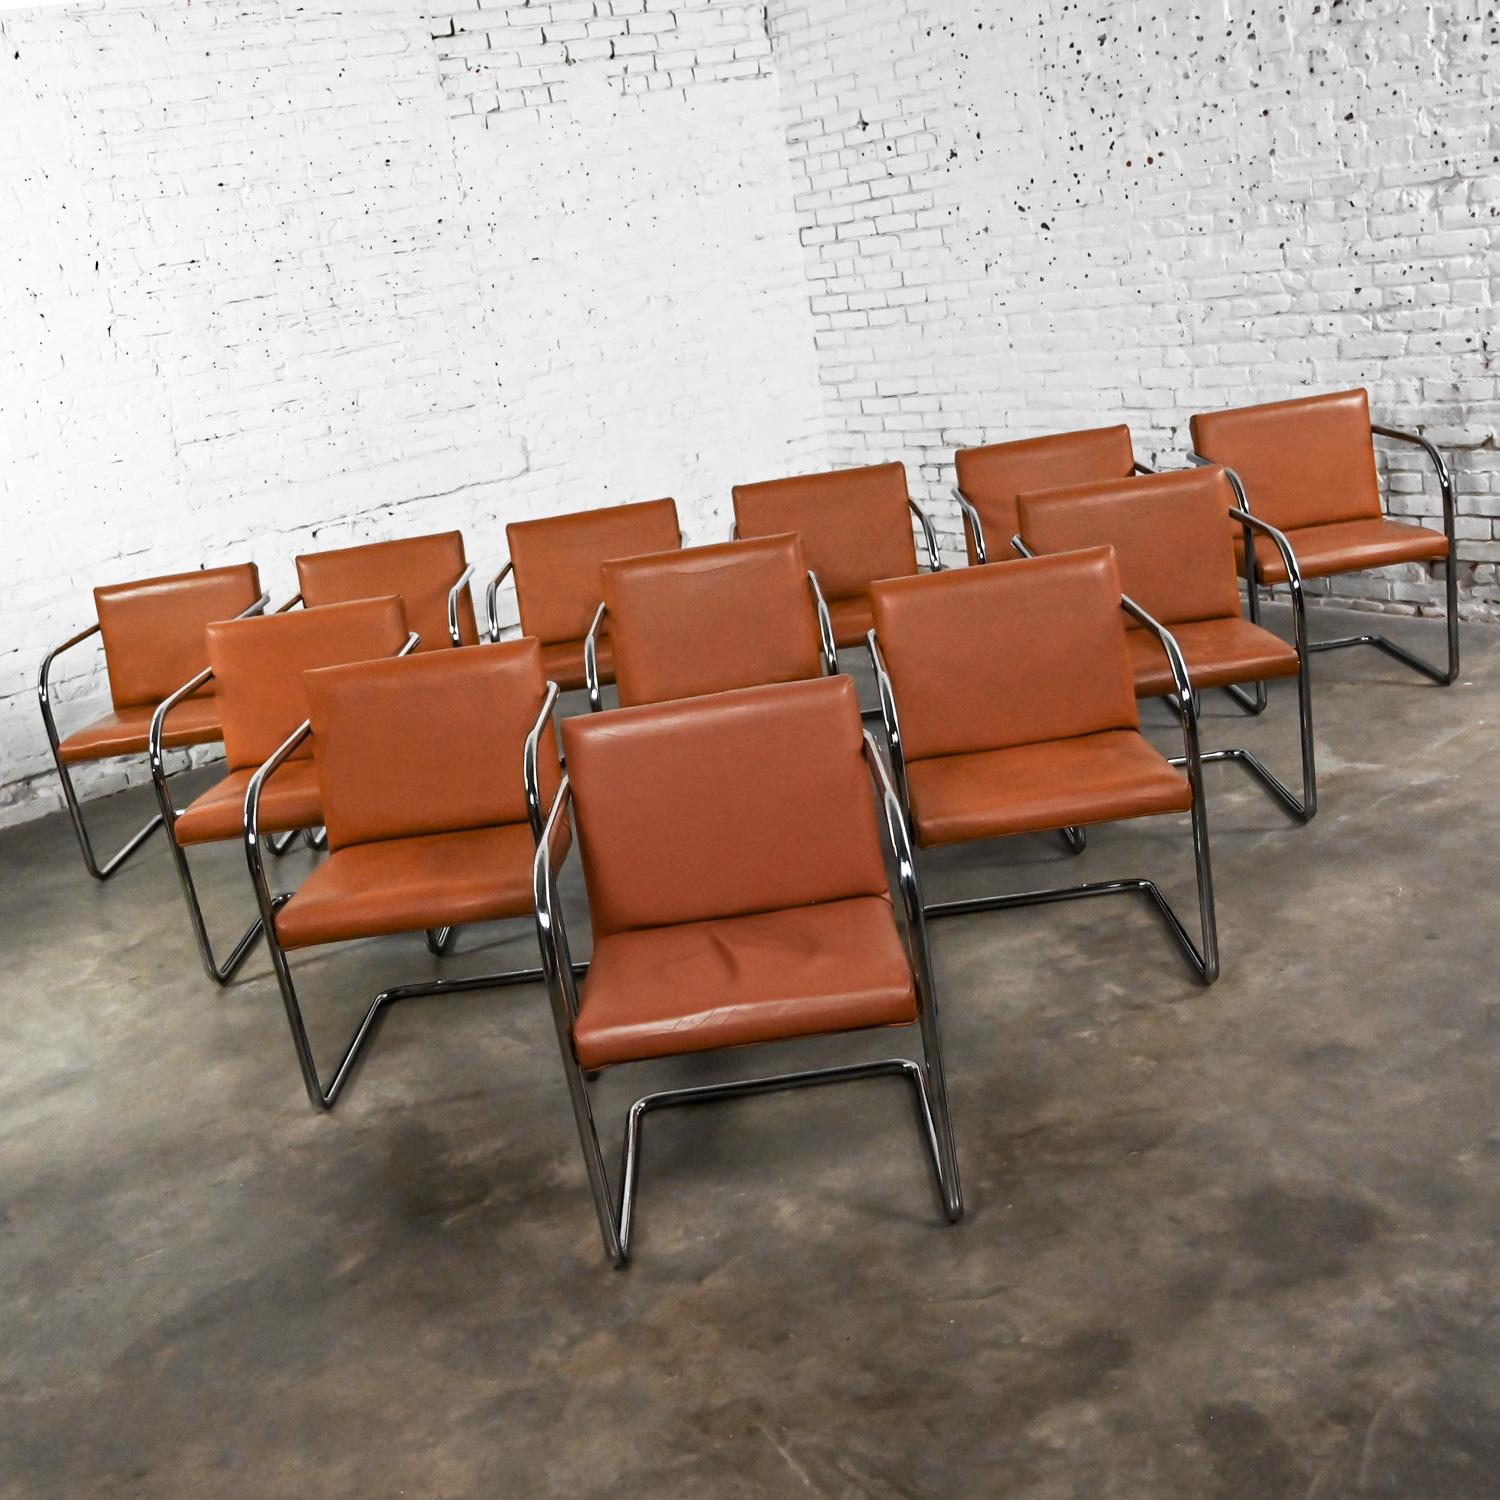 Thonet Bauhaus Brno Style Chairs Chrome & Cognac Leather Cantilever Set of 12  For Sale 6